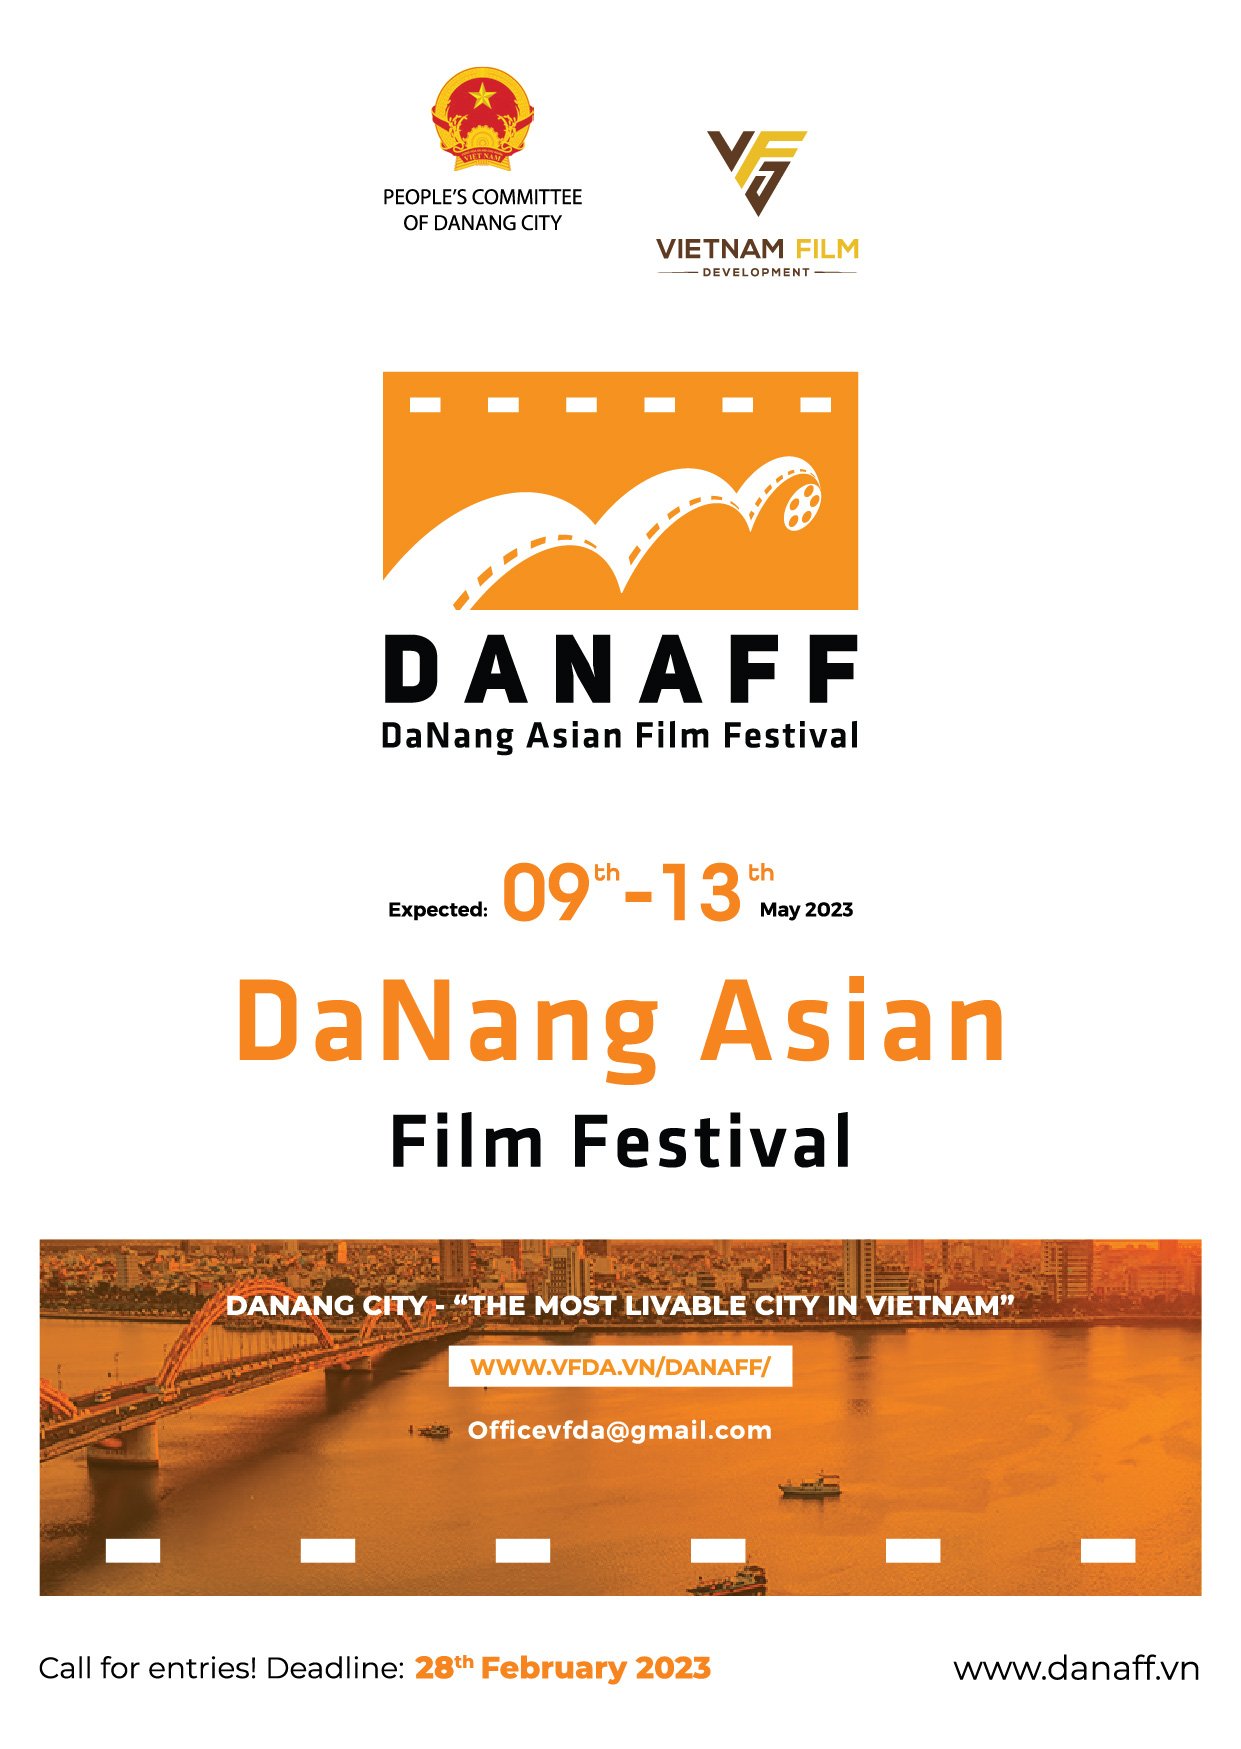 “The 1st Danang Asian Film Festival” scheduled to be held from May 9th -13th